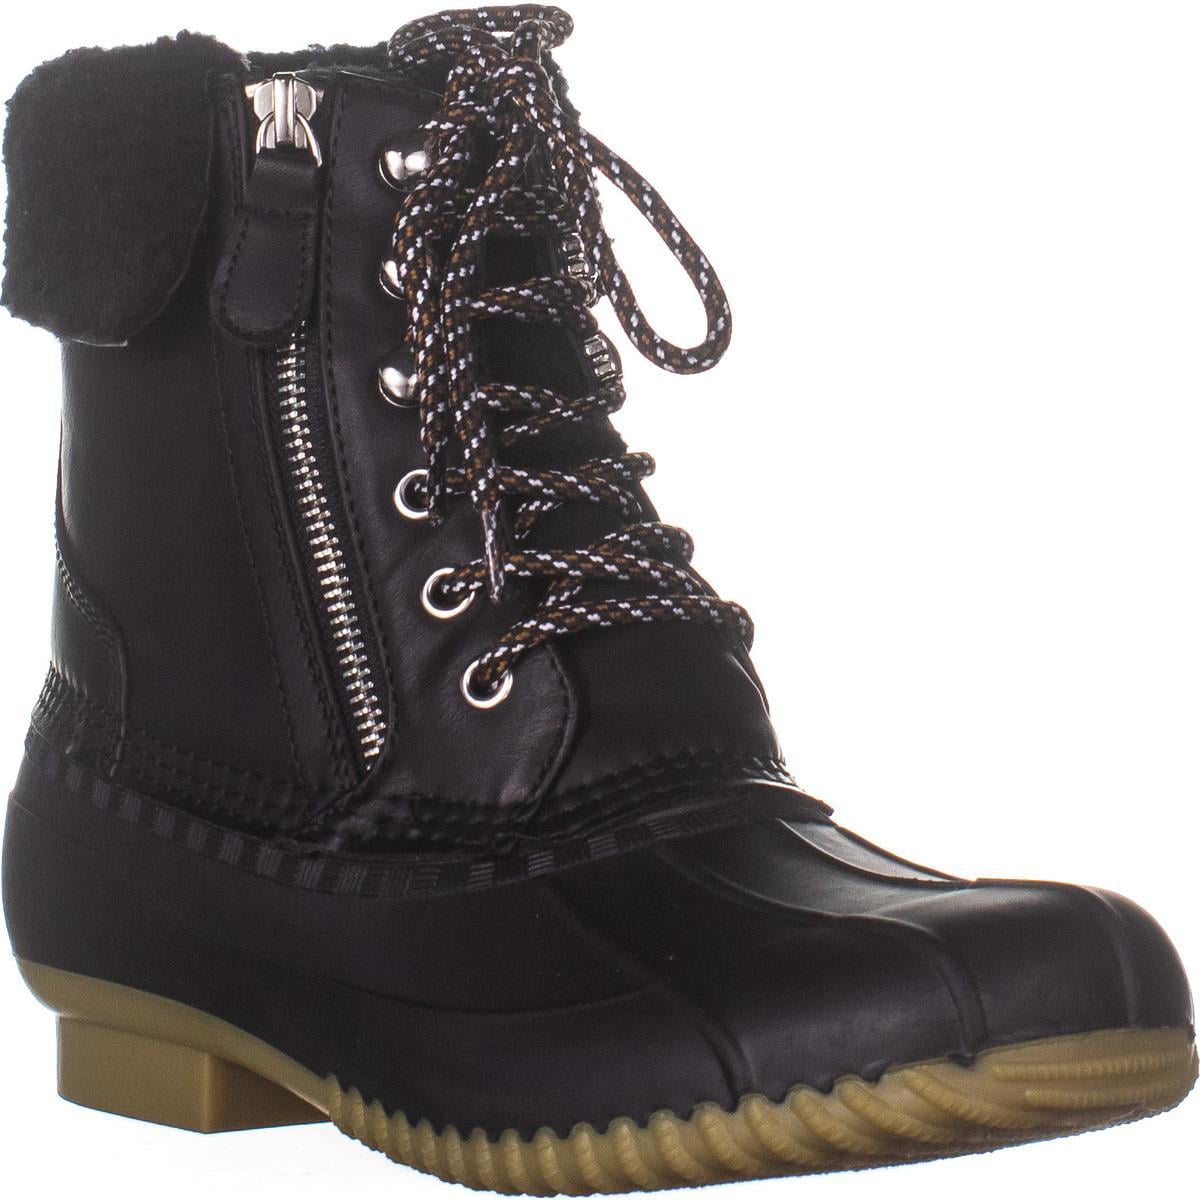 Womens Tommy Hilfiger Raheli2 Lace Up Winter Boots, Black, 8 US